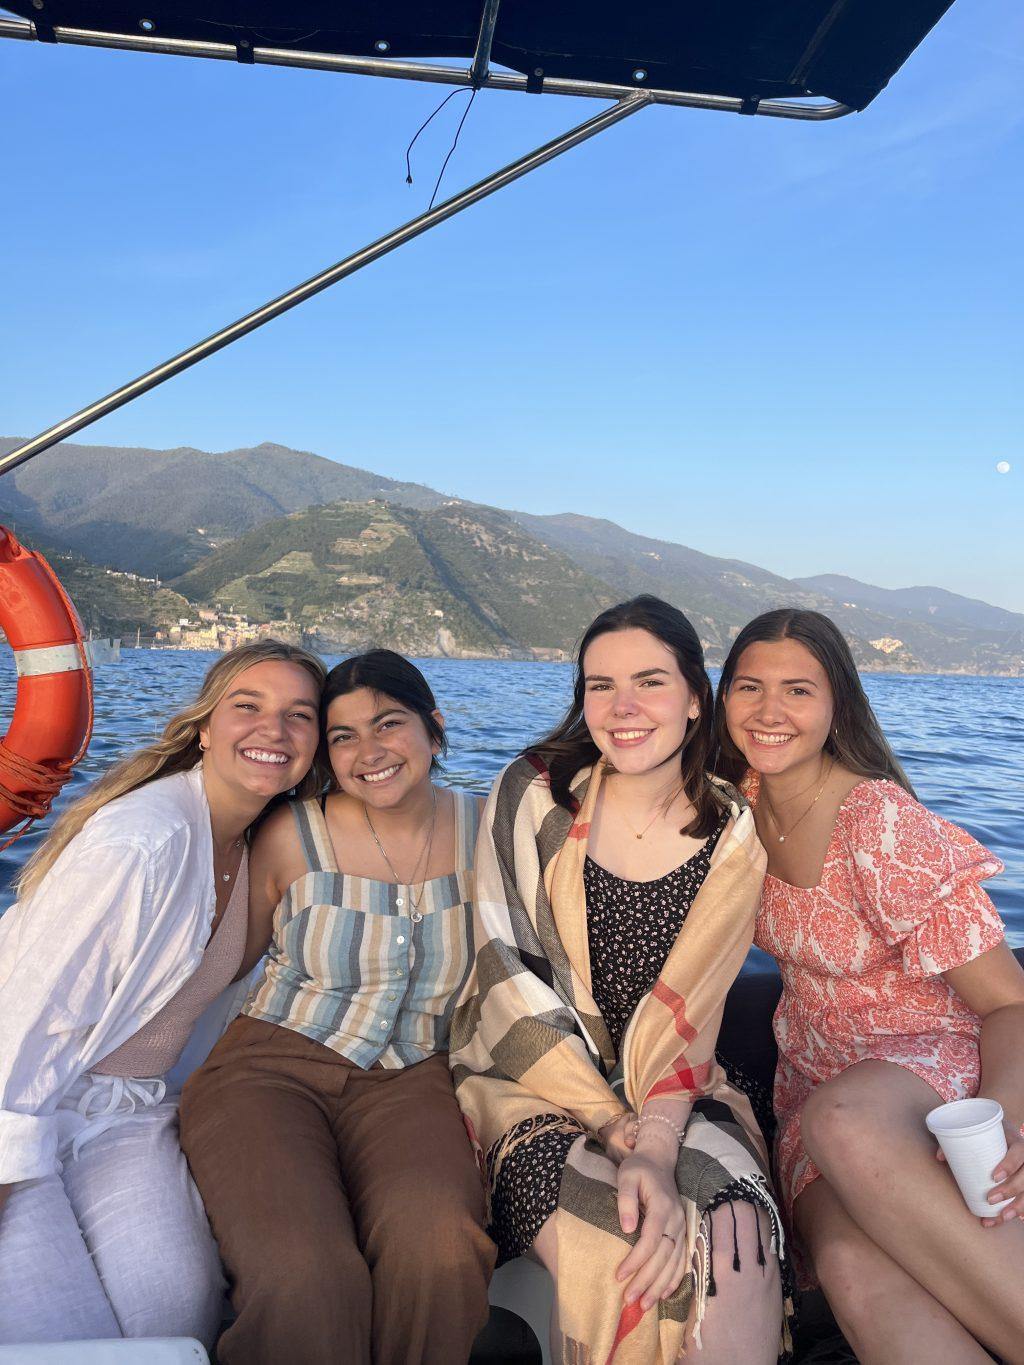 Juniors Mariah Macias, Alex Willhelm, Vanessa Zubas and I on a boat in Cinque Terre, Italy. The sunset boat tour was one of our favorite parts of the whole month in Italy.